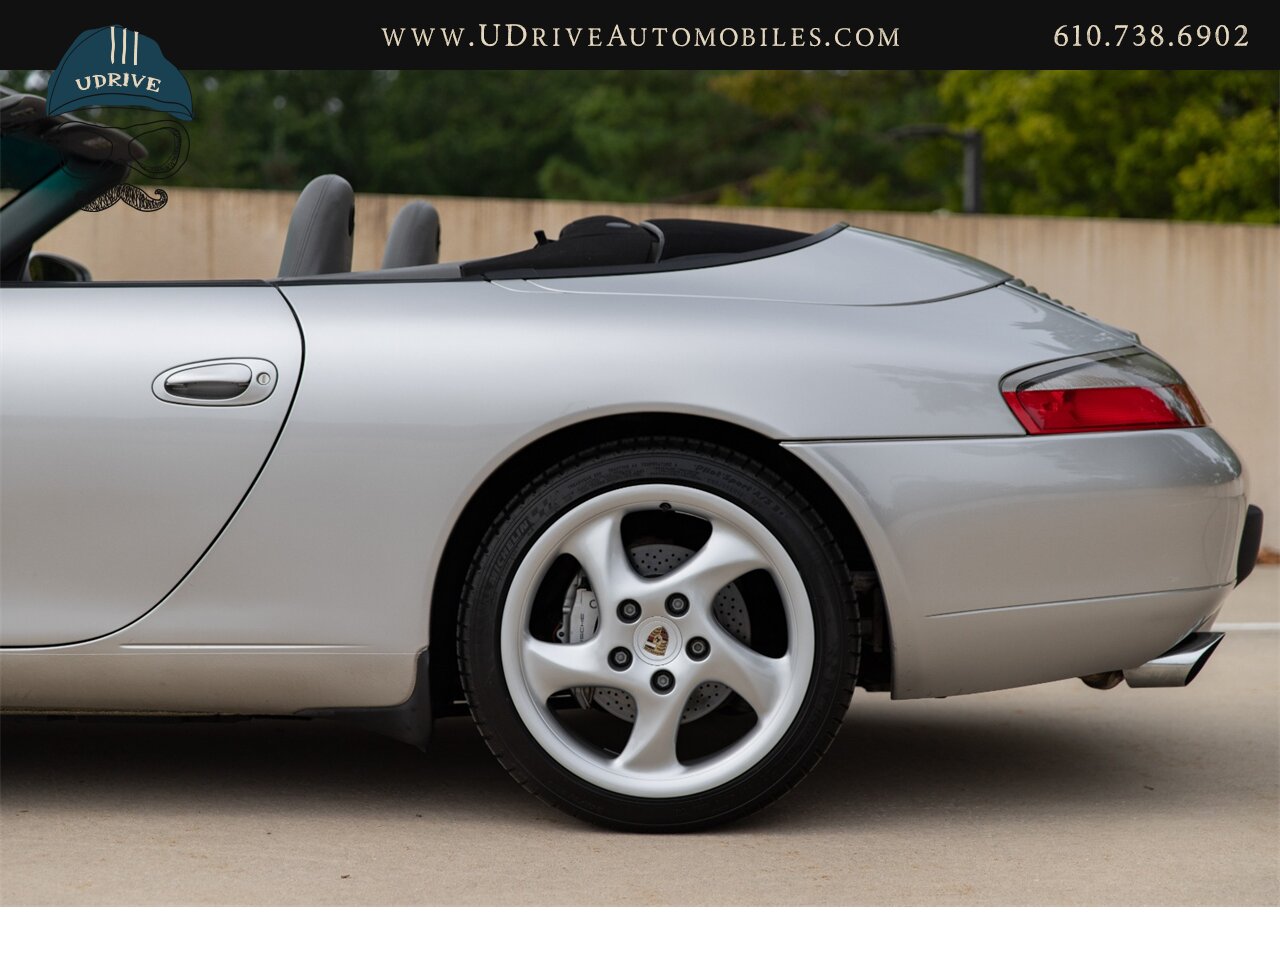 2001 Porsche 911 Carrera 4 Cabriolet Tiptronic IMS Upgrade  Power Seats 18in Turbo Look Wheels 2 Owners $5k Recent Service - Photo 26 - West Chester, PA 19382